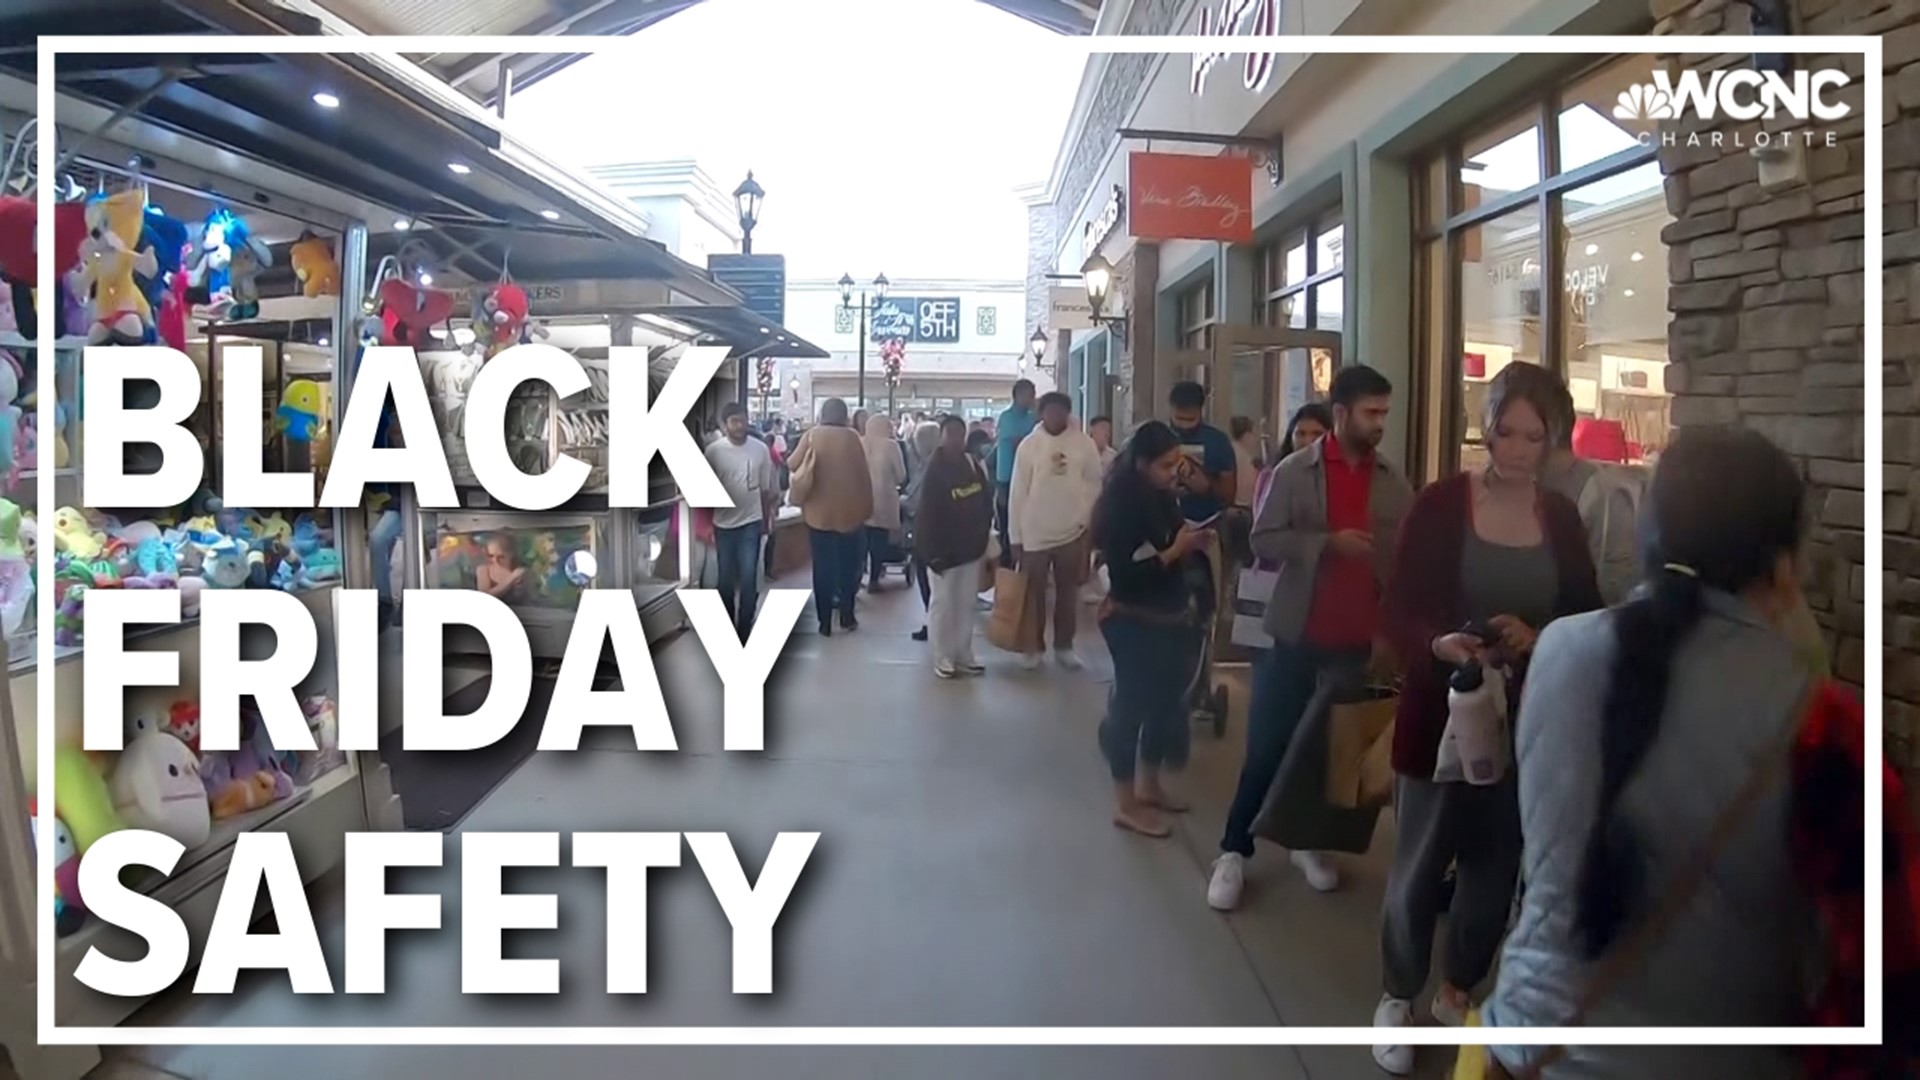 Sharon Campbell, general manager of the Charlotte Premium Outlets, said the outlet mall is taking the safety of everyone very seriously.